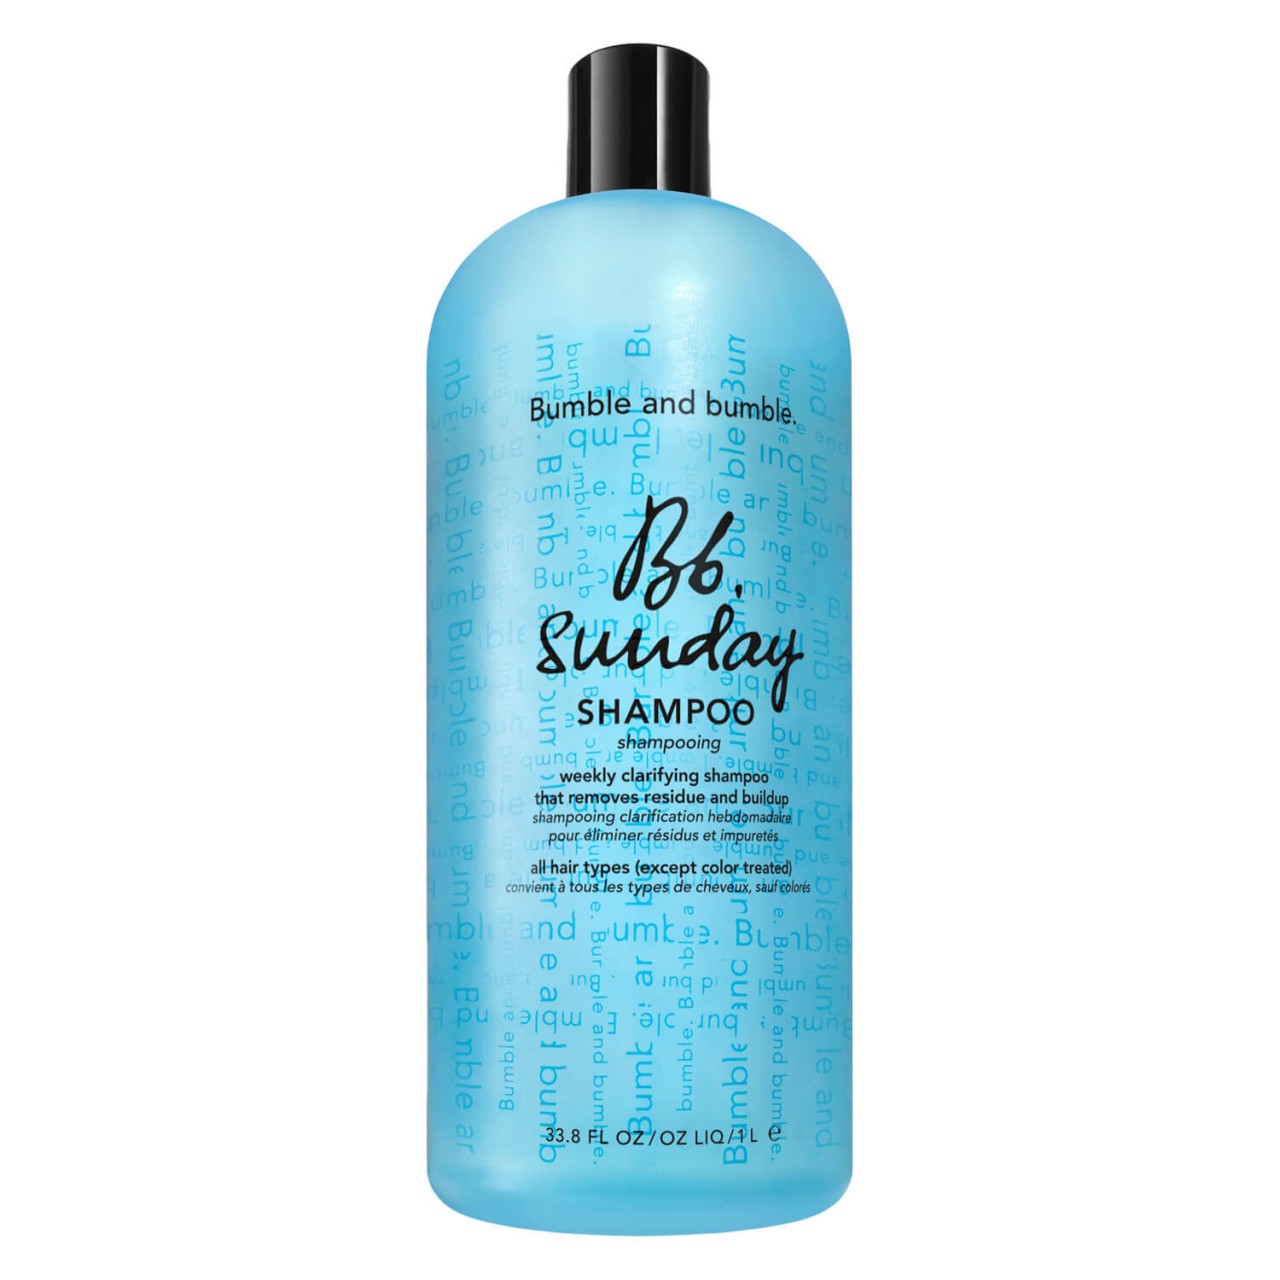 Bb. Care - Sunday Shampoo von Bumble and bumble.